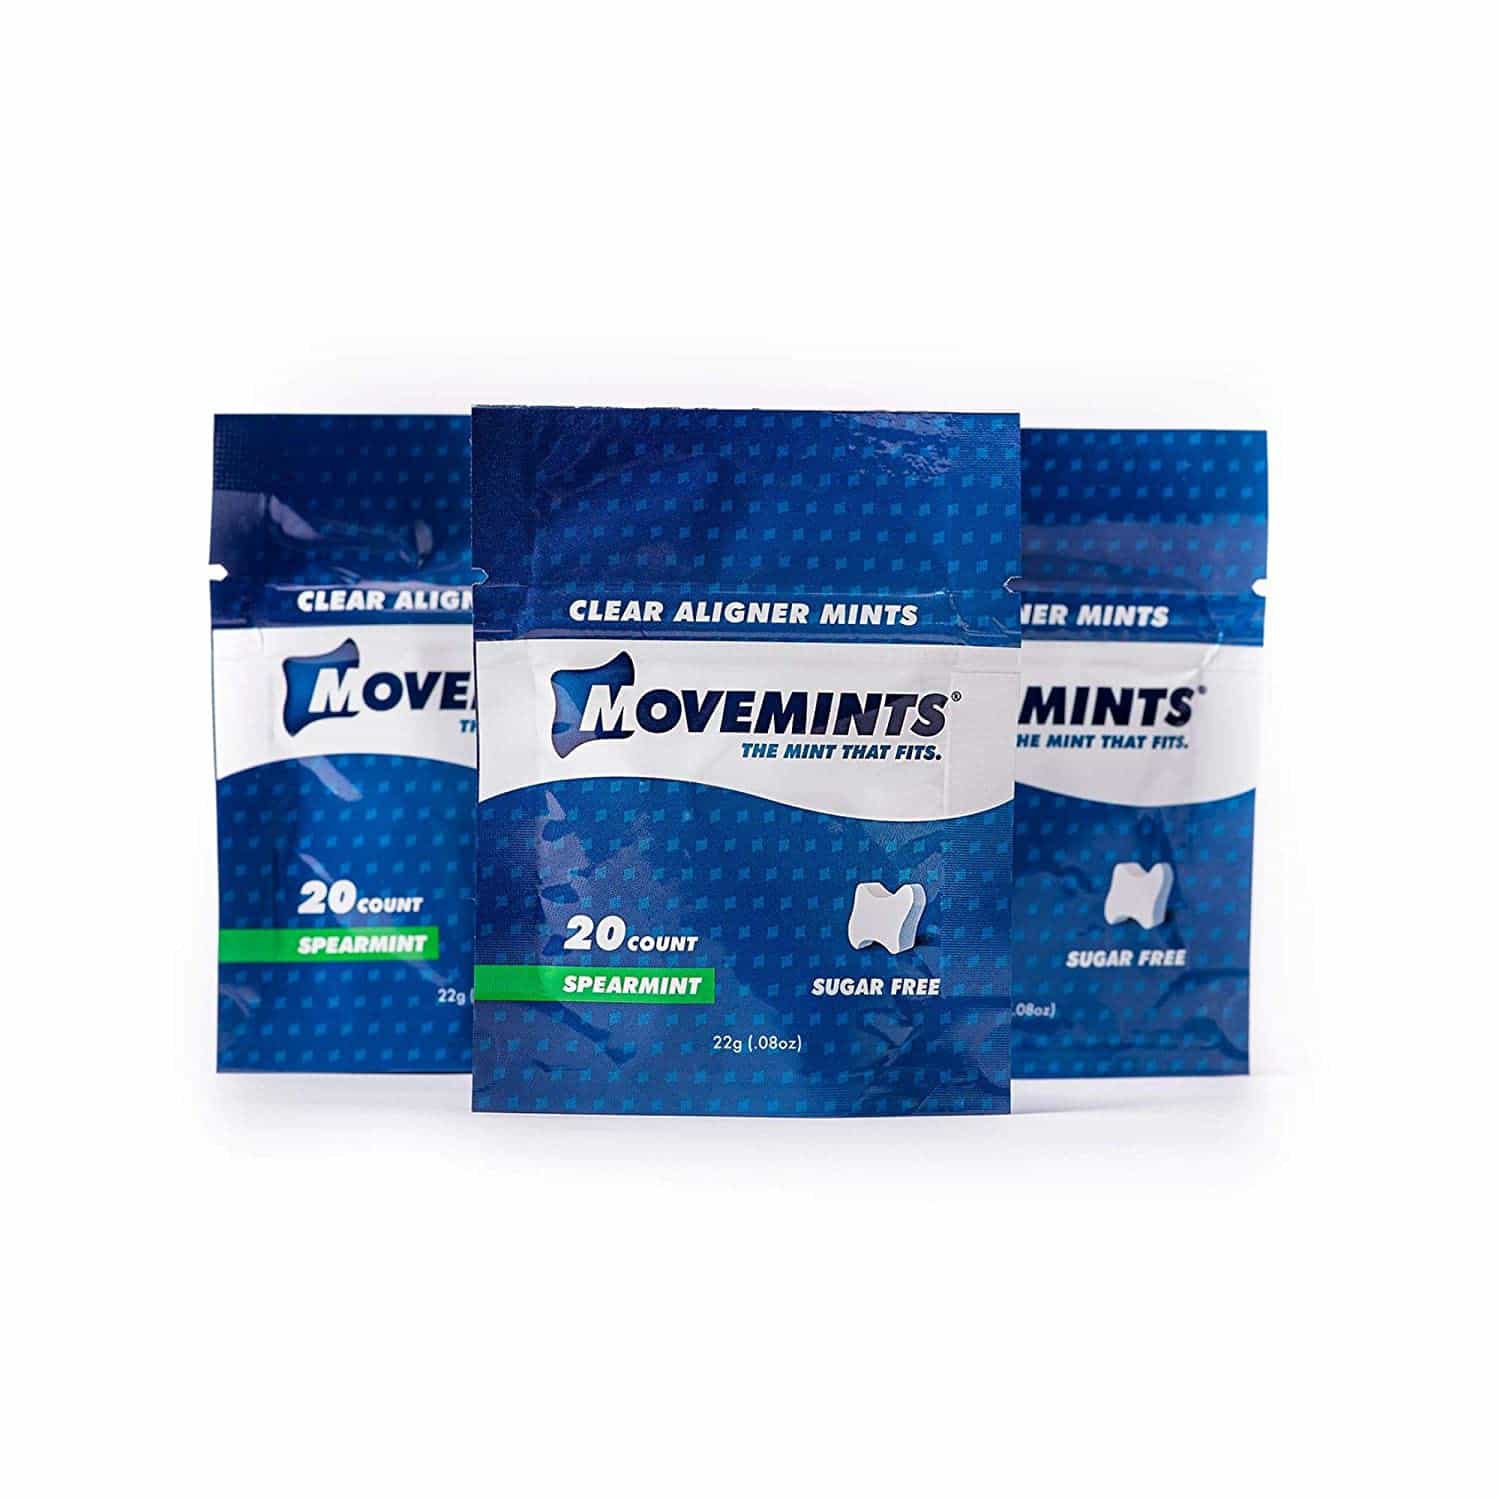 Package of Movemints clear aligner mints